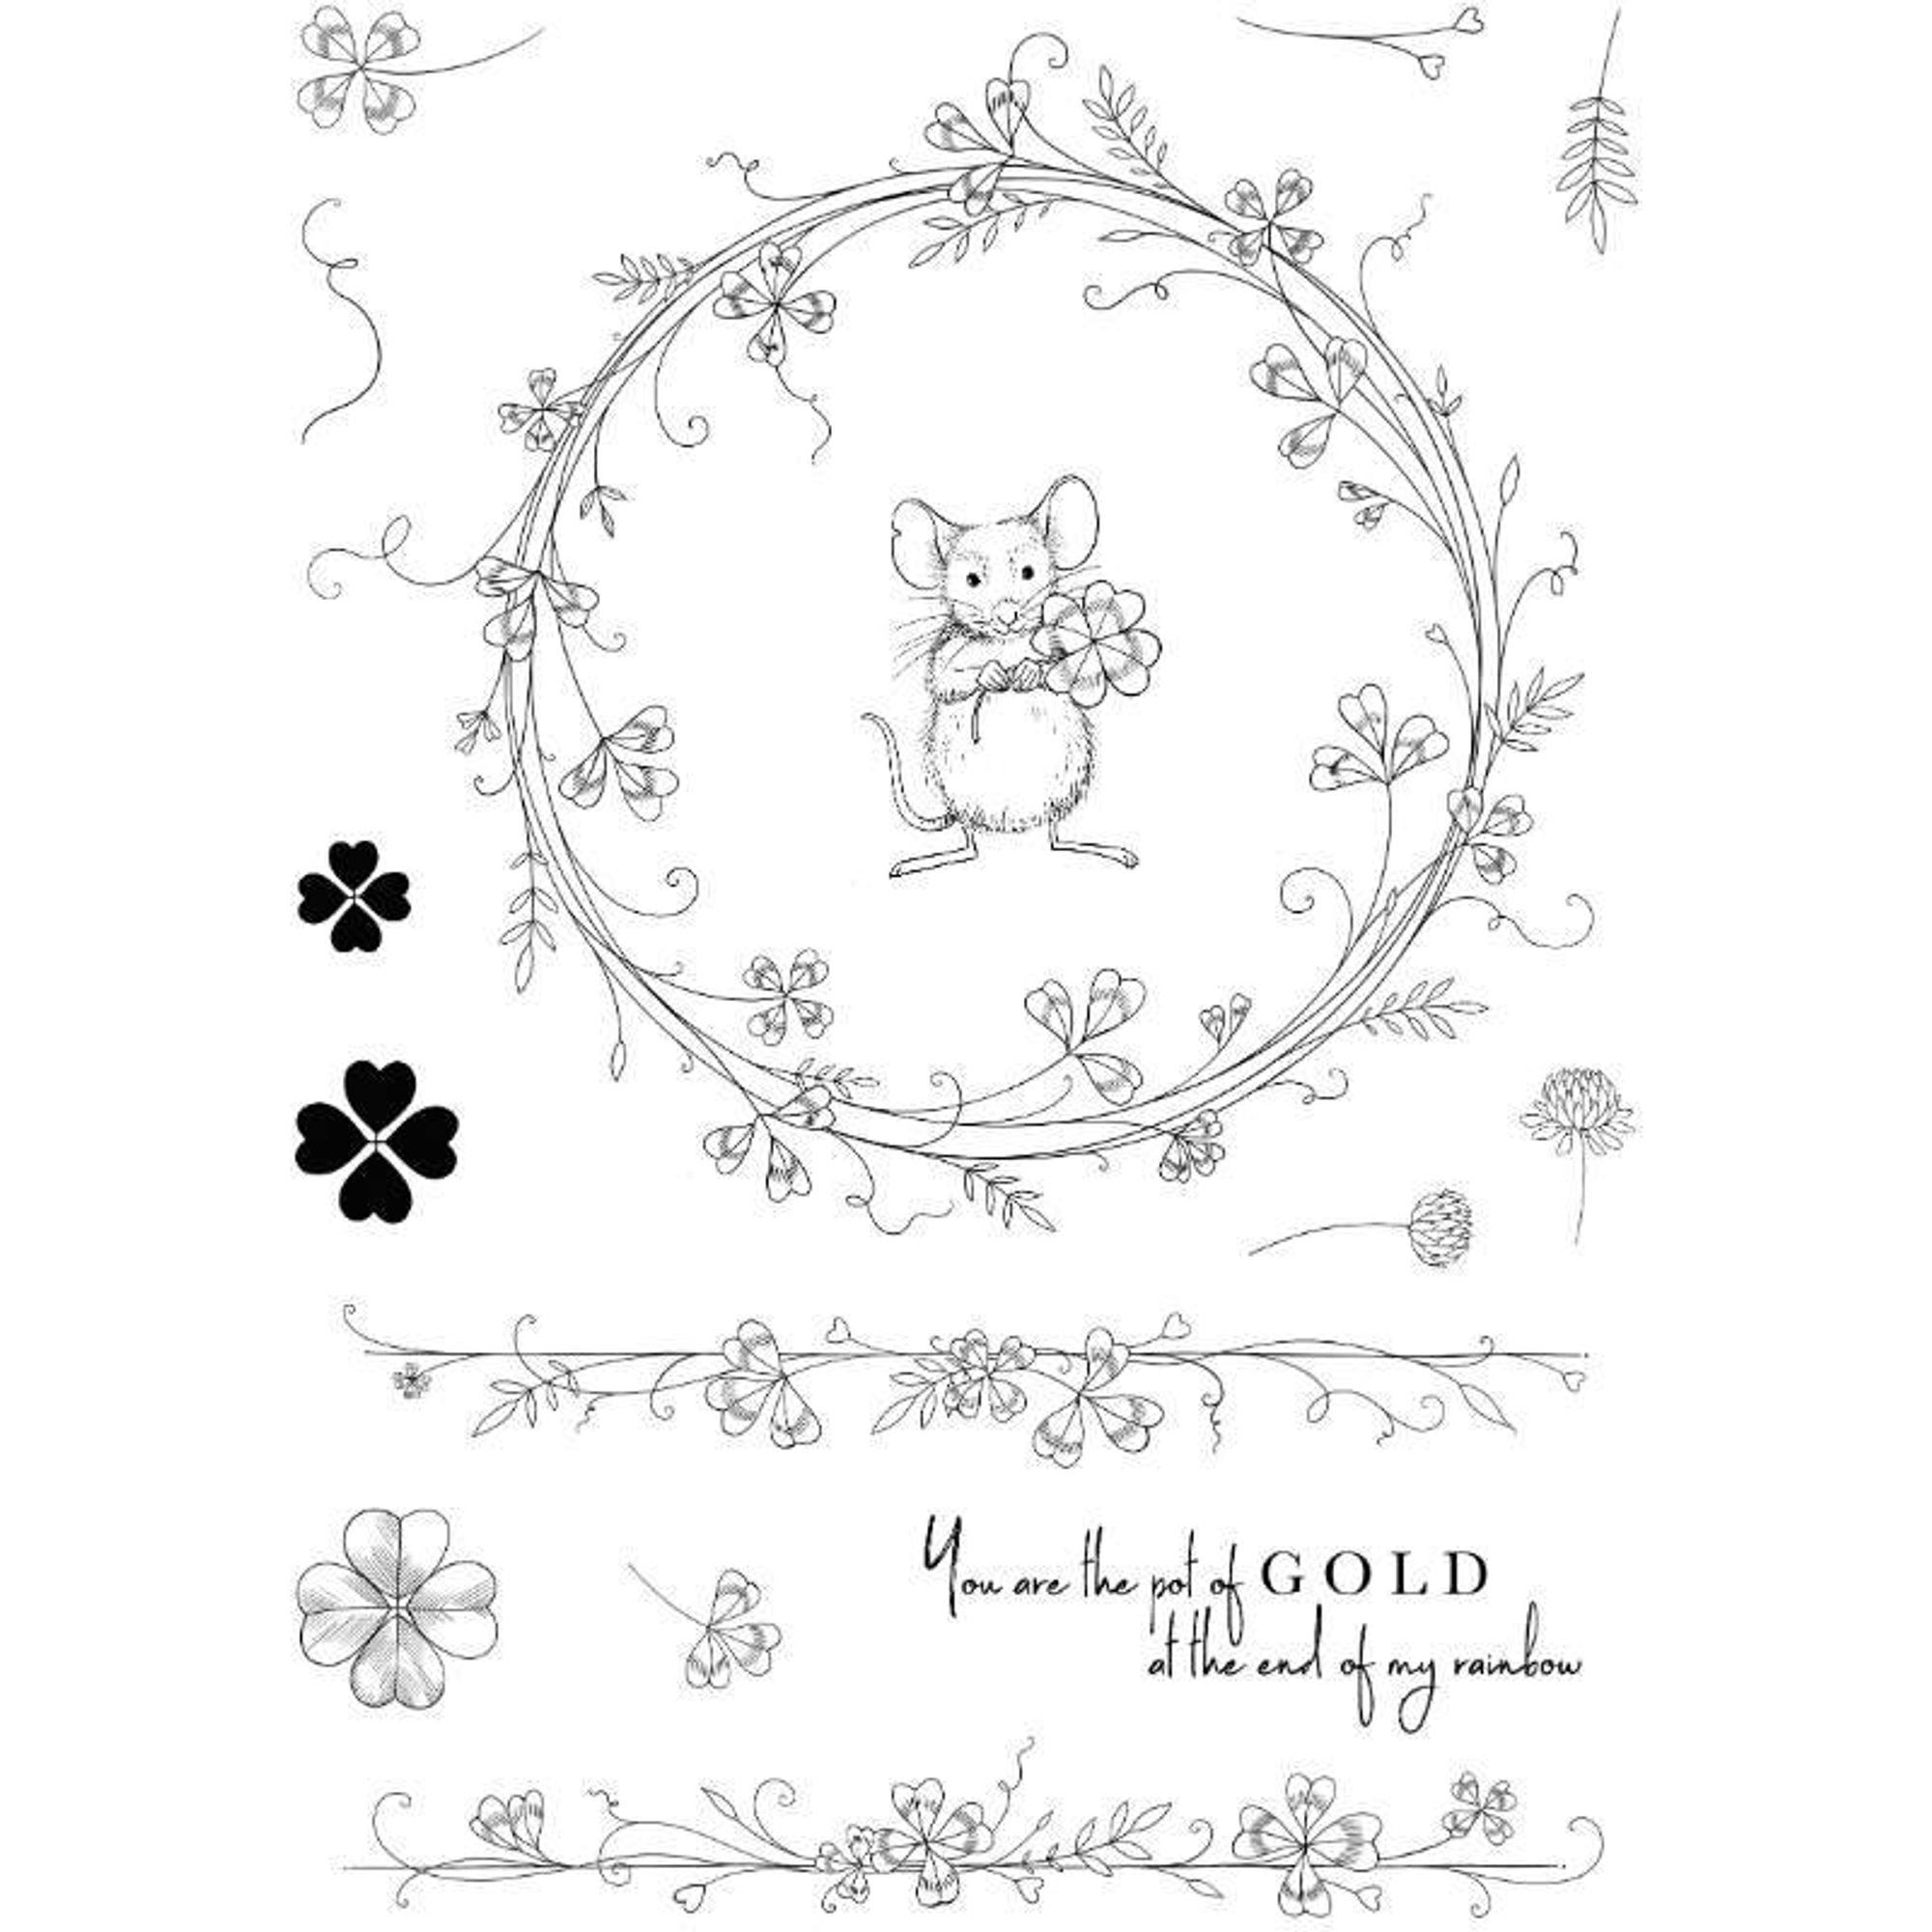 Pink Ink Designs Lucky Clover 6 in x 8 in Clear Stamp Set